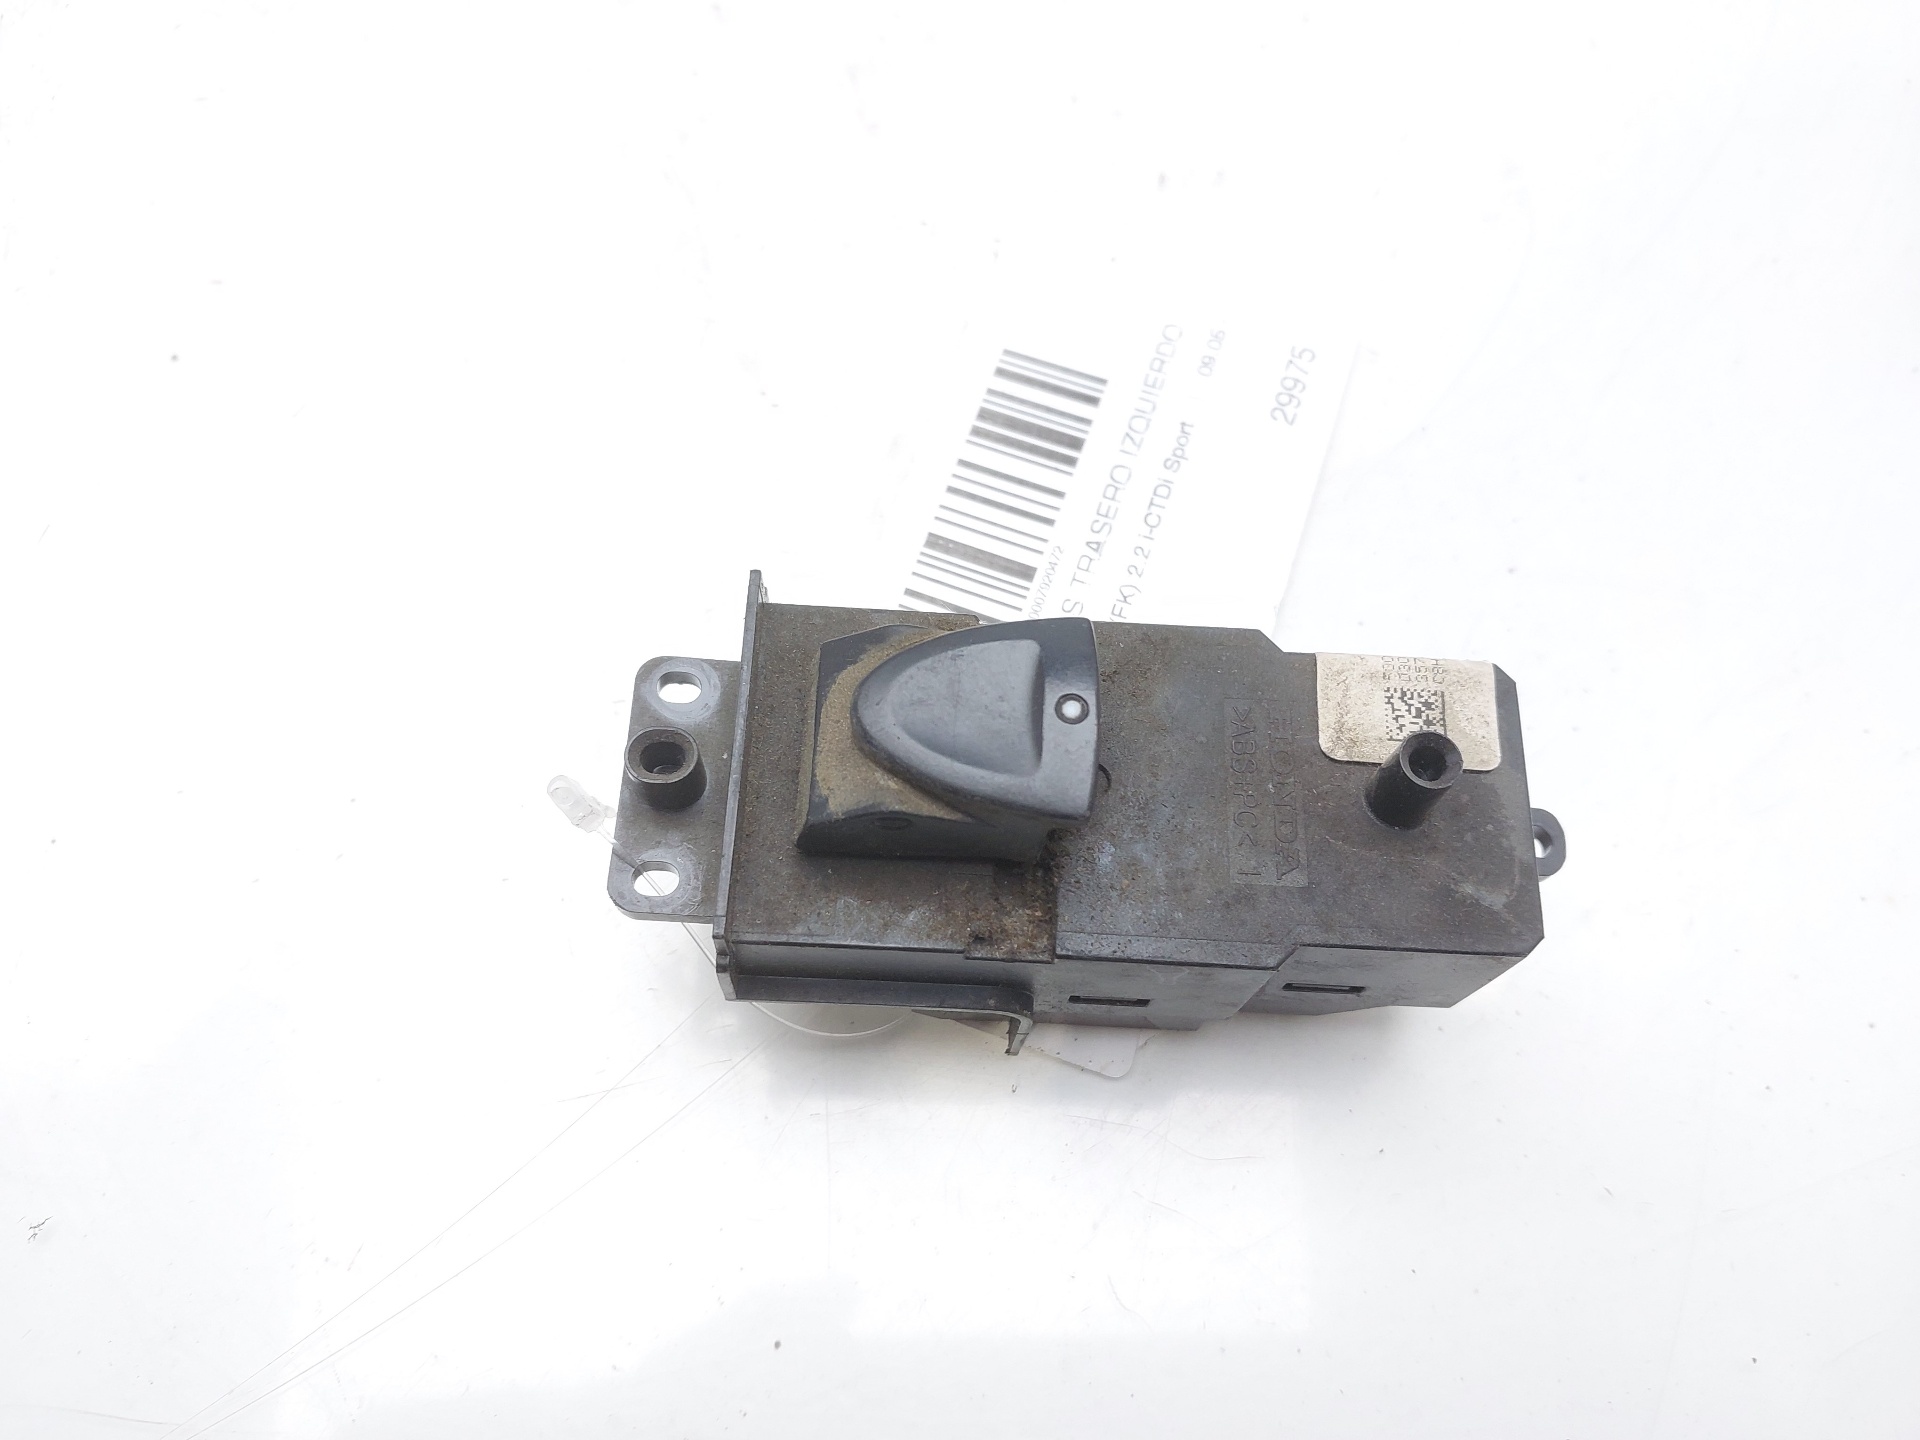 HONDA Civic 8 generation (2005-2012) Rear Right Door Window Control Switch 83790SMGE020UHS 24996198